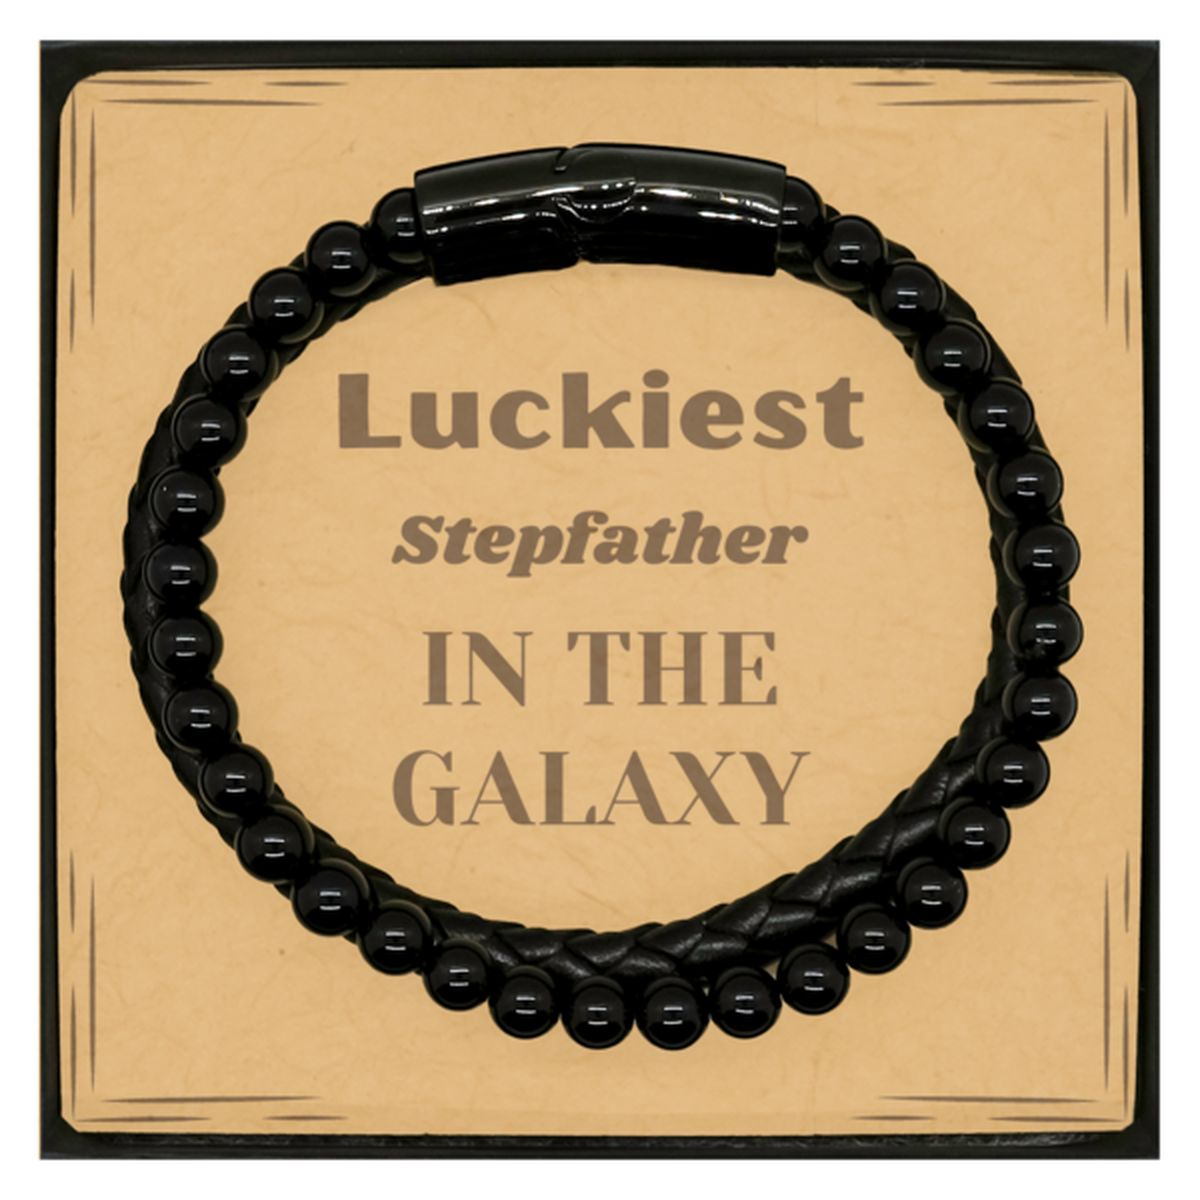 Luckiest Stepfather in the Galaxy, To My Stepfather Message Card Gifts, Christmas Stepfather Stone Leather Bracelets Gifts, X-mas Birthday Unique Gifts For Stepfather Men Women